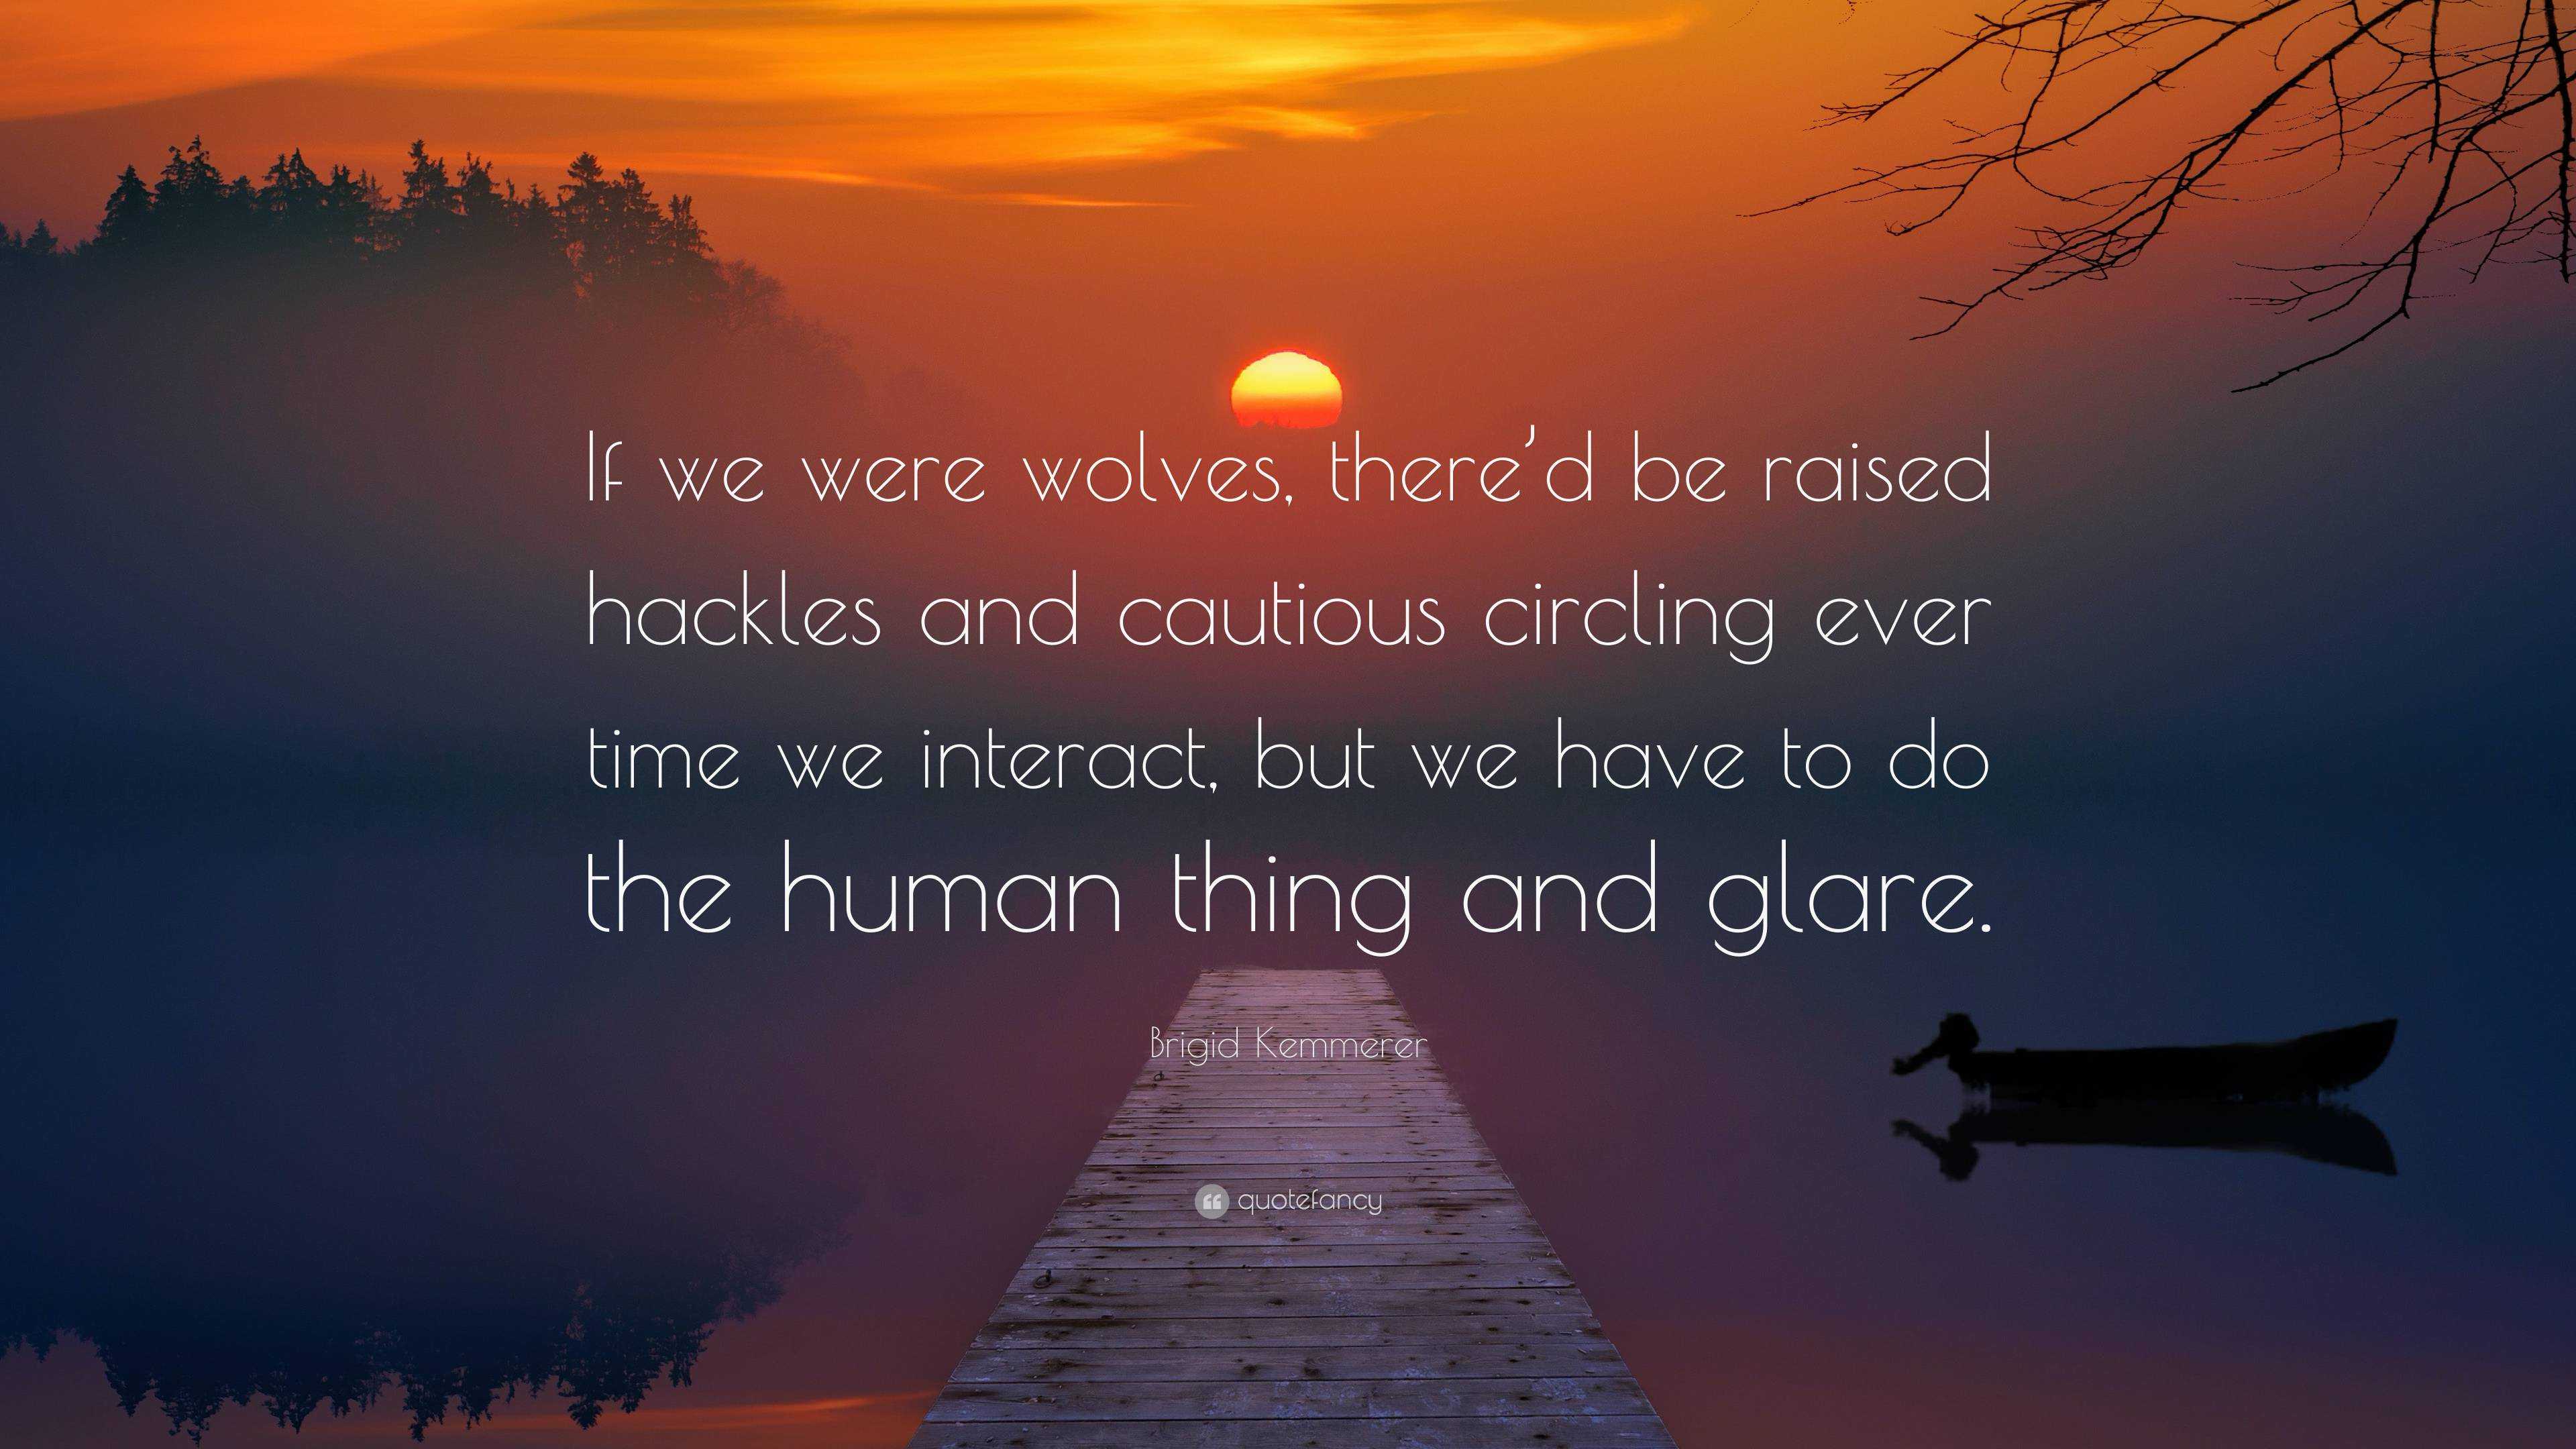 Brigid Kemmerer Quote: “If we were wolves, there’d be raised hackles ...